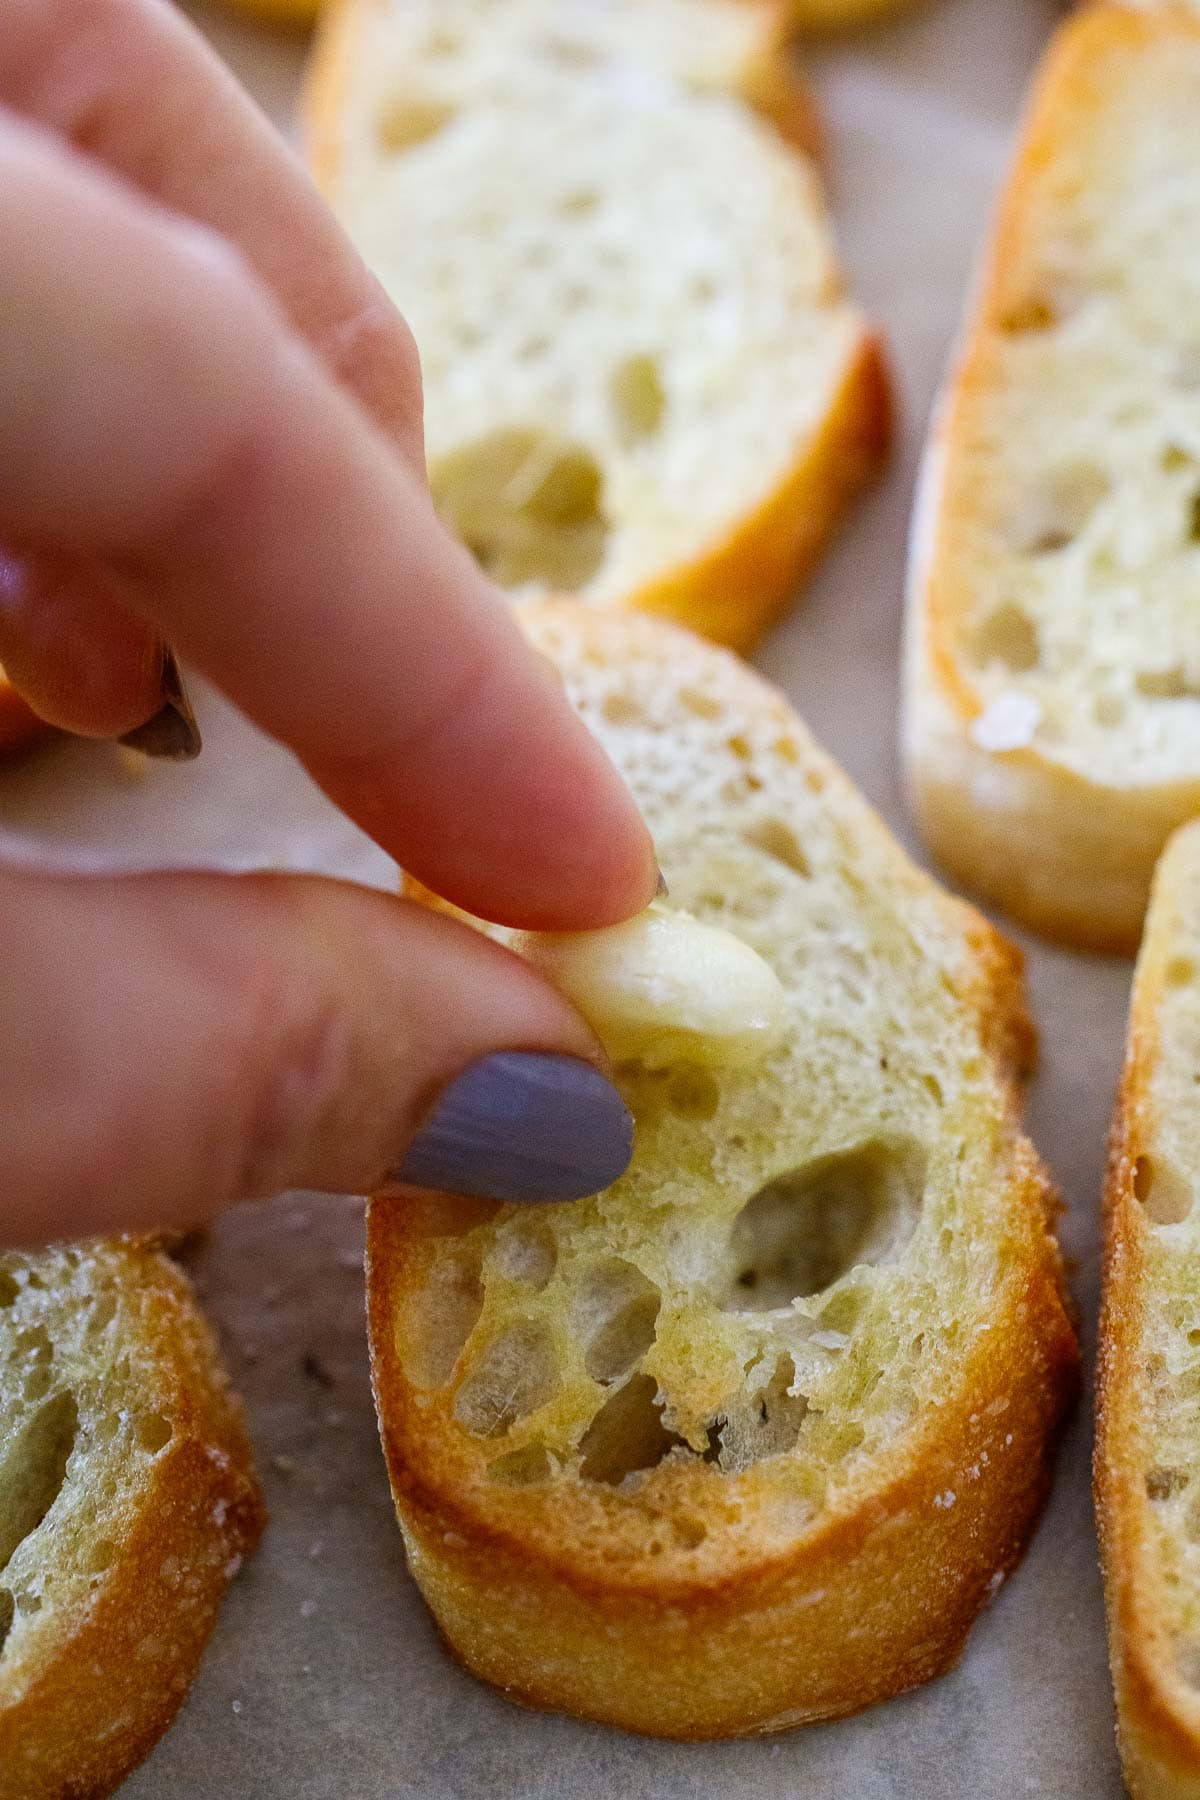 Two fingers rubbing raw garlic over baguette slice